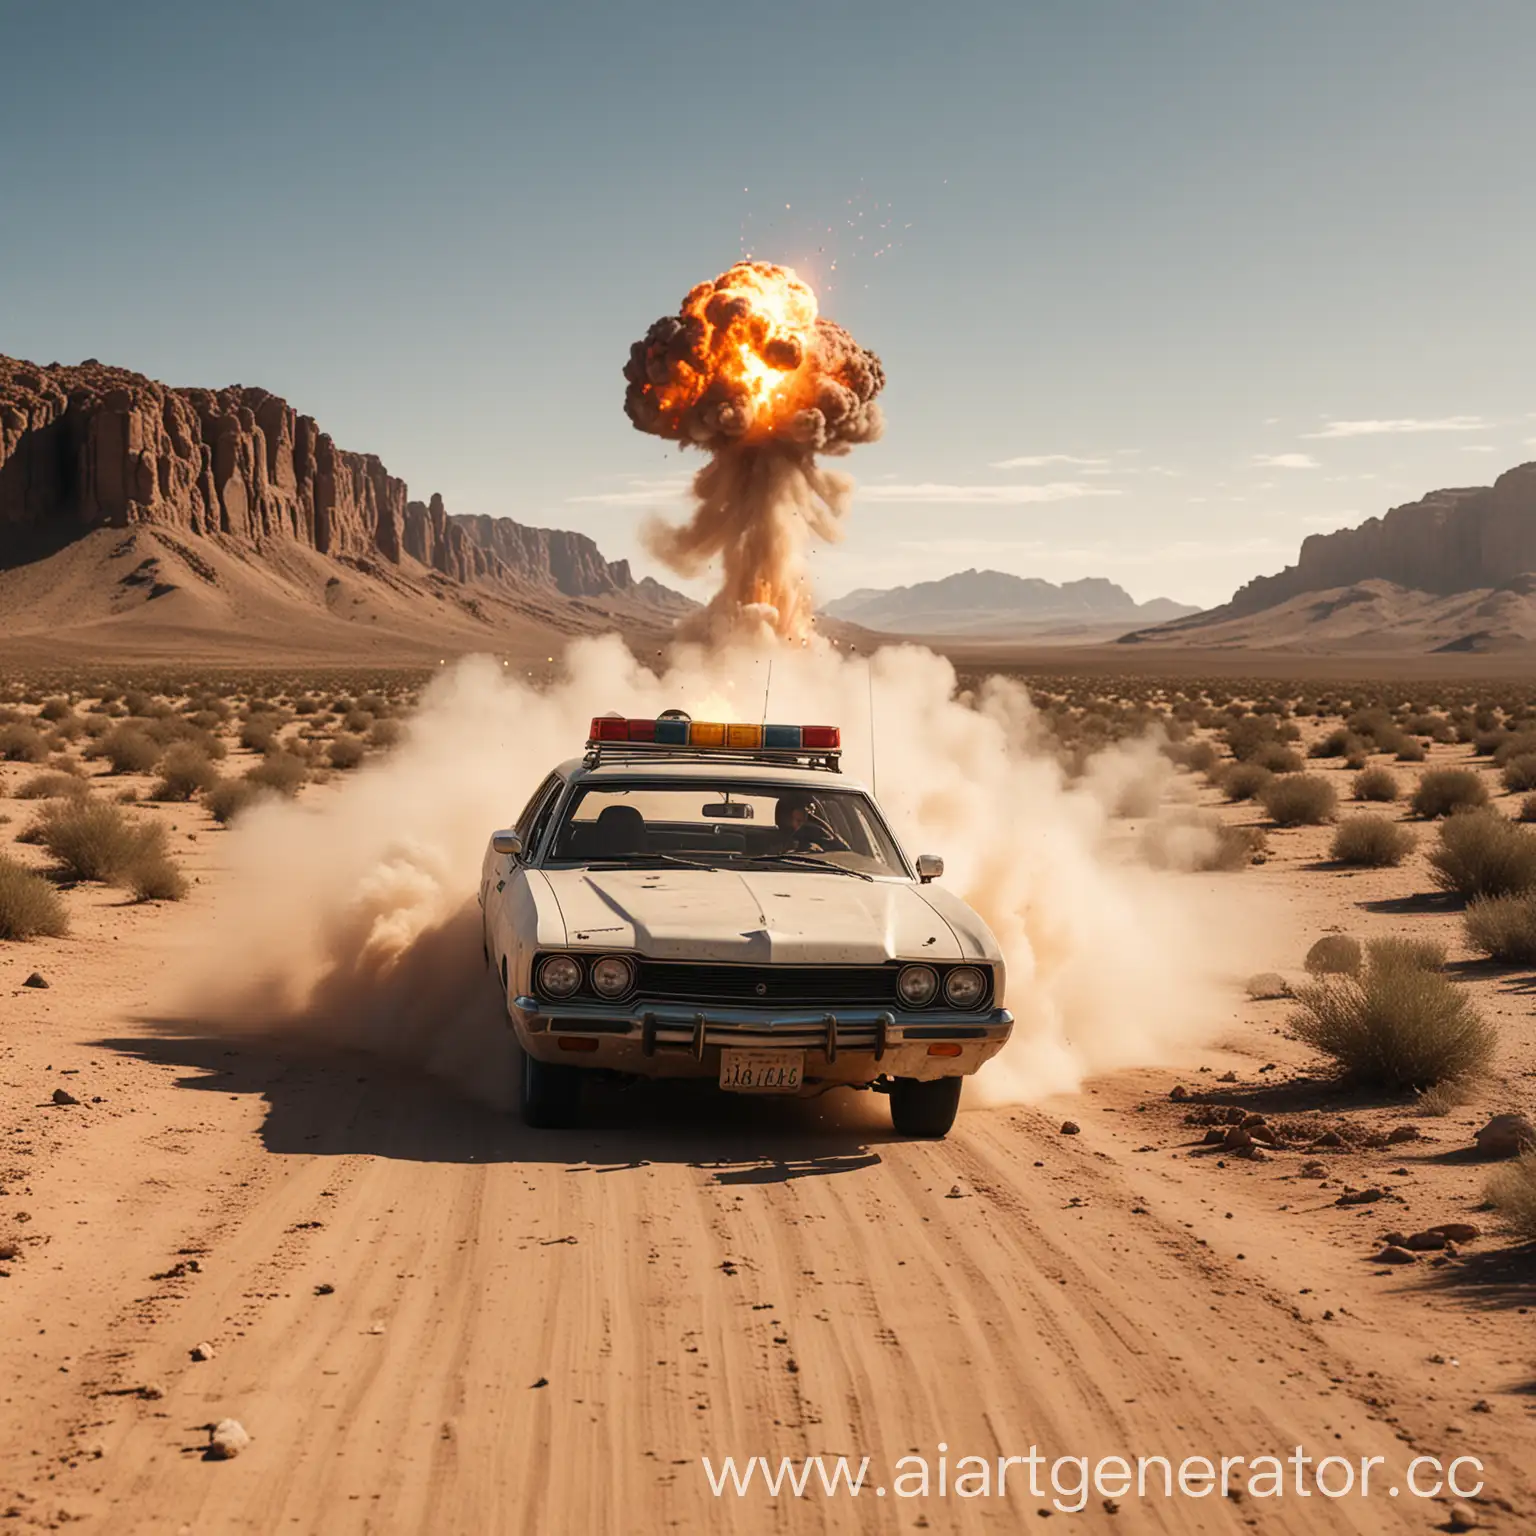 Tipsy-Car-Escaping-Explosions-Pursued-by-Police-in-Desert-Chase